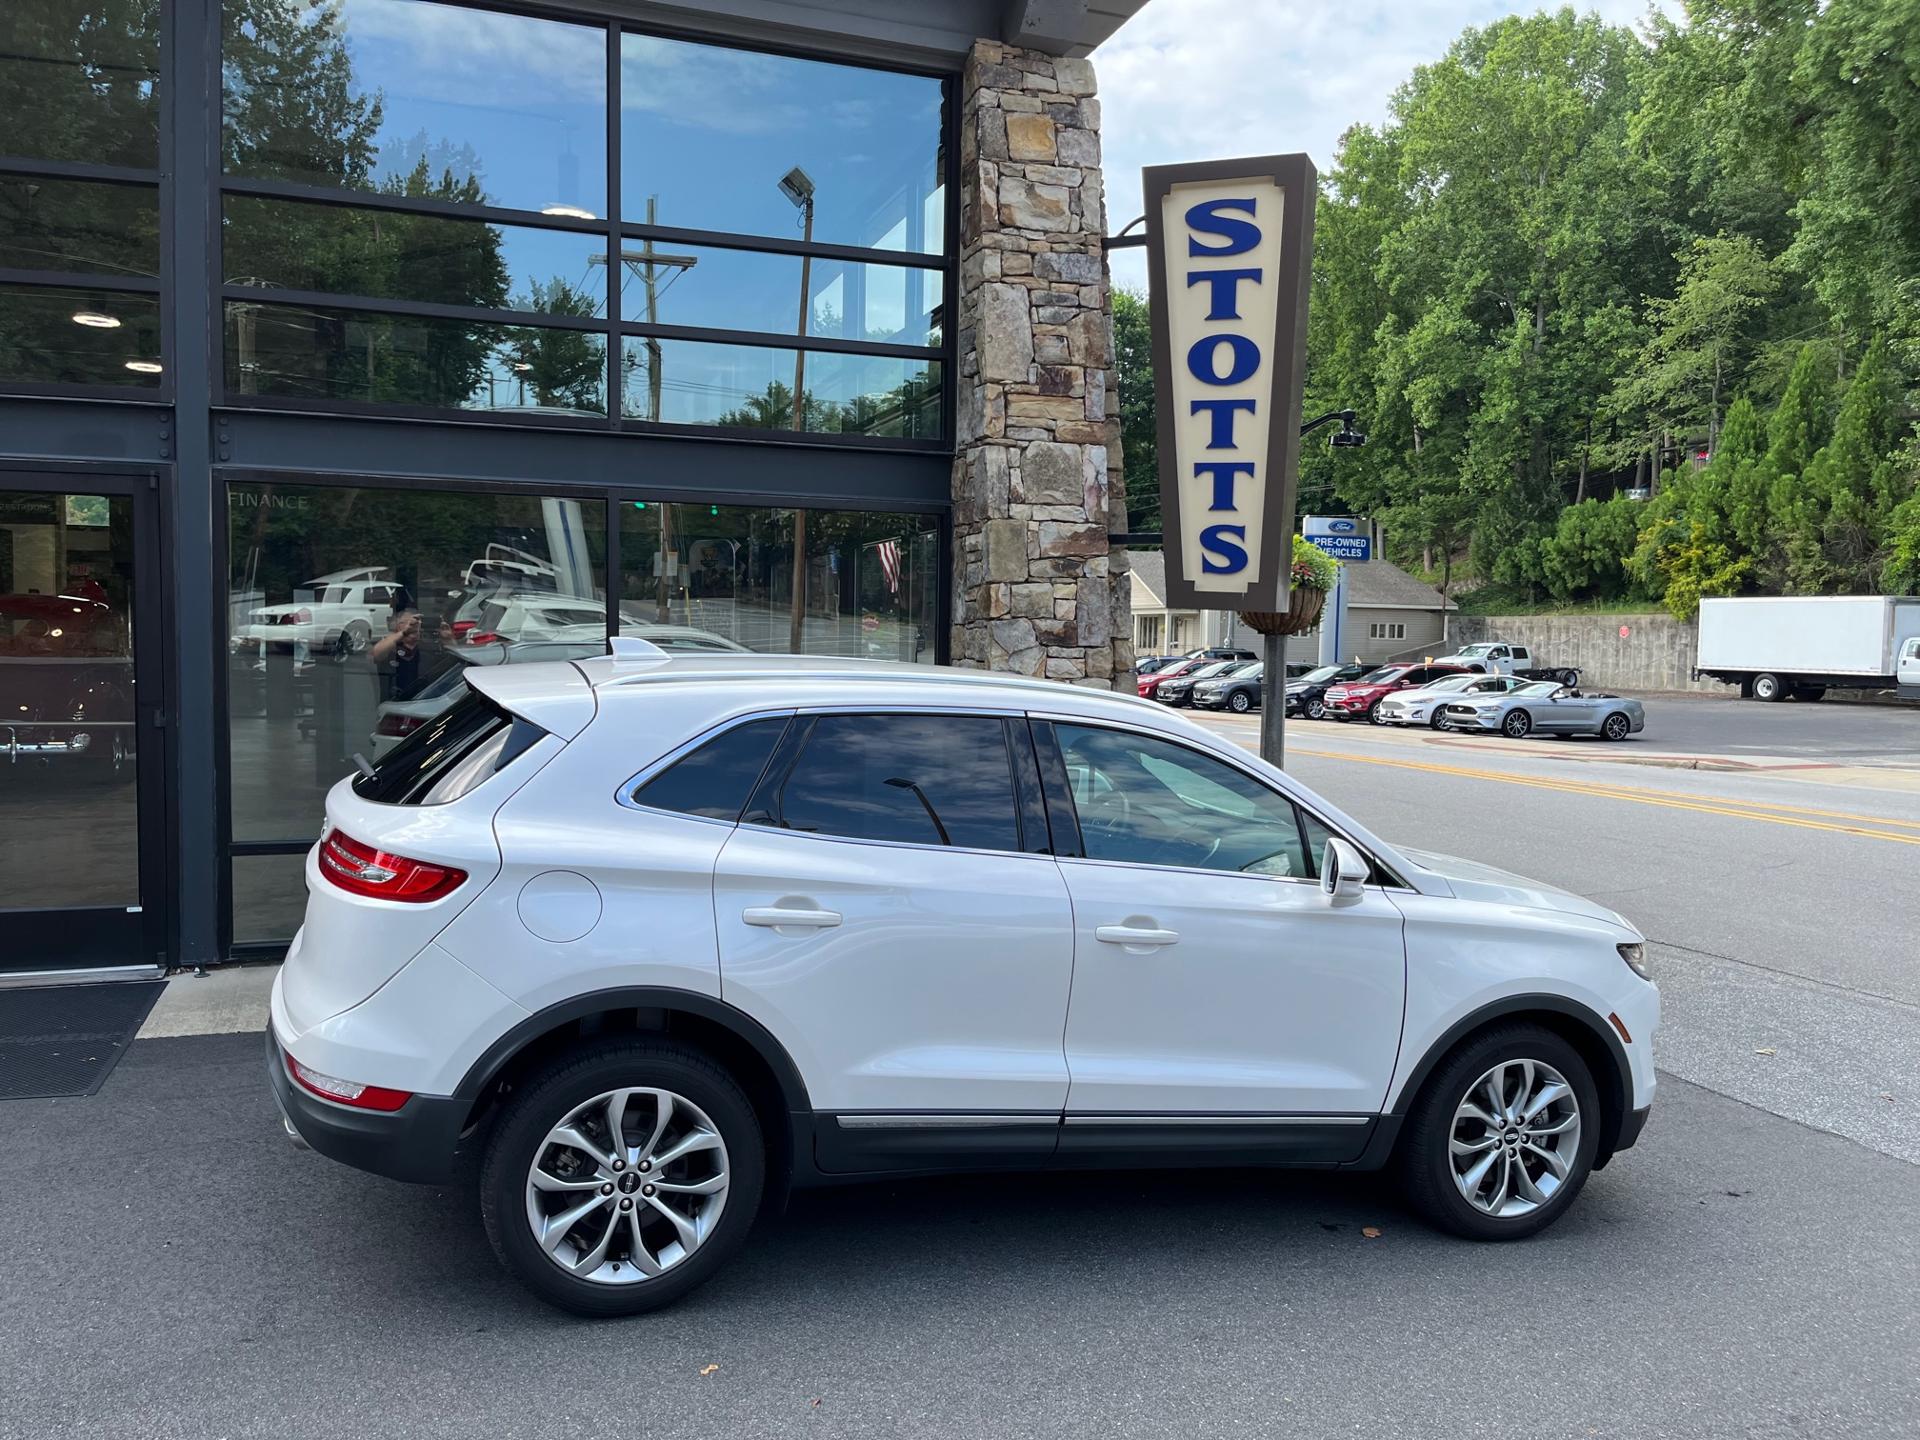 Used, Certified, Loaner LINCOLN MKC Vehicles for Sale in Tryon, NC |  Stott's Ford Inc